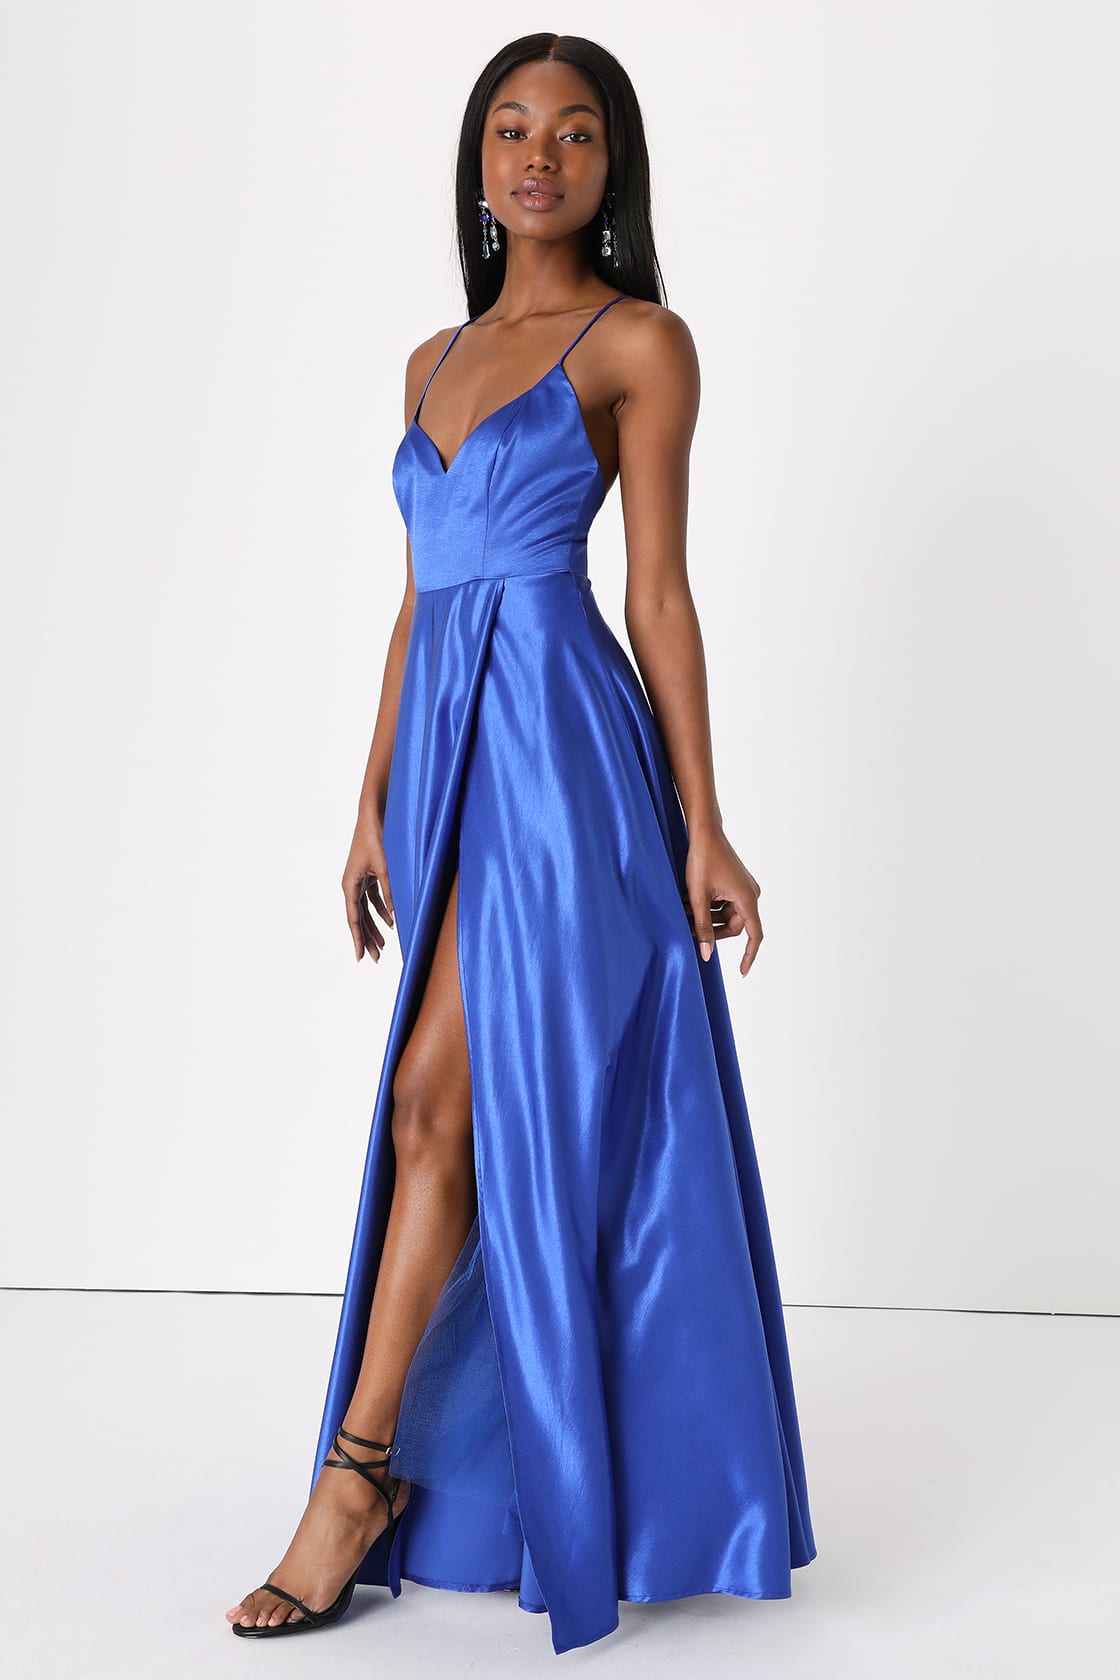 What To Wear To A Military Ball: A 2023 Guide - Lulus.com Fashion Blog